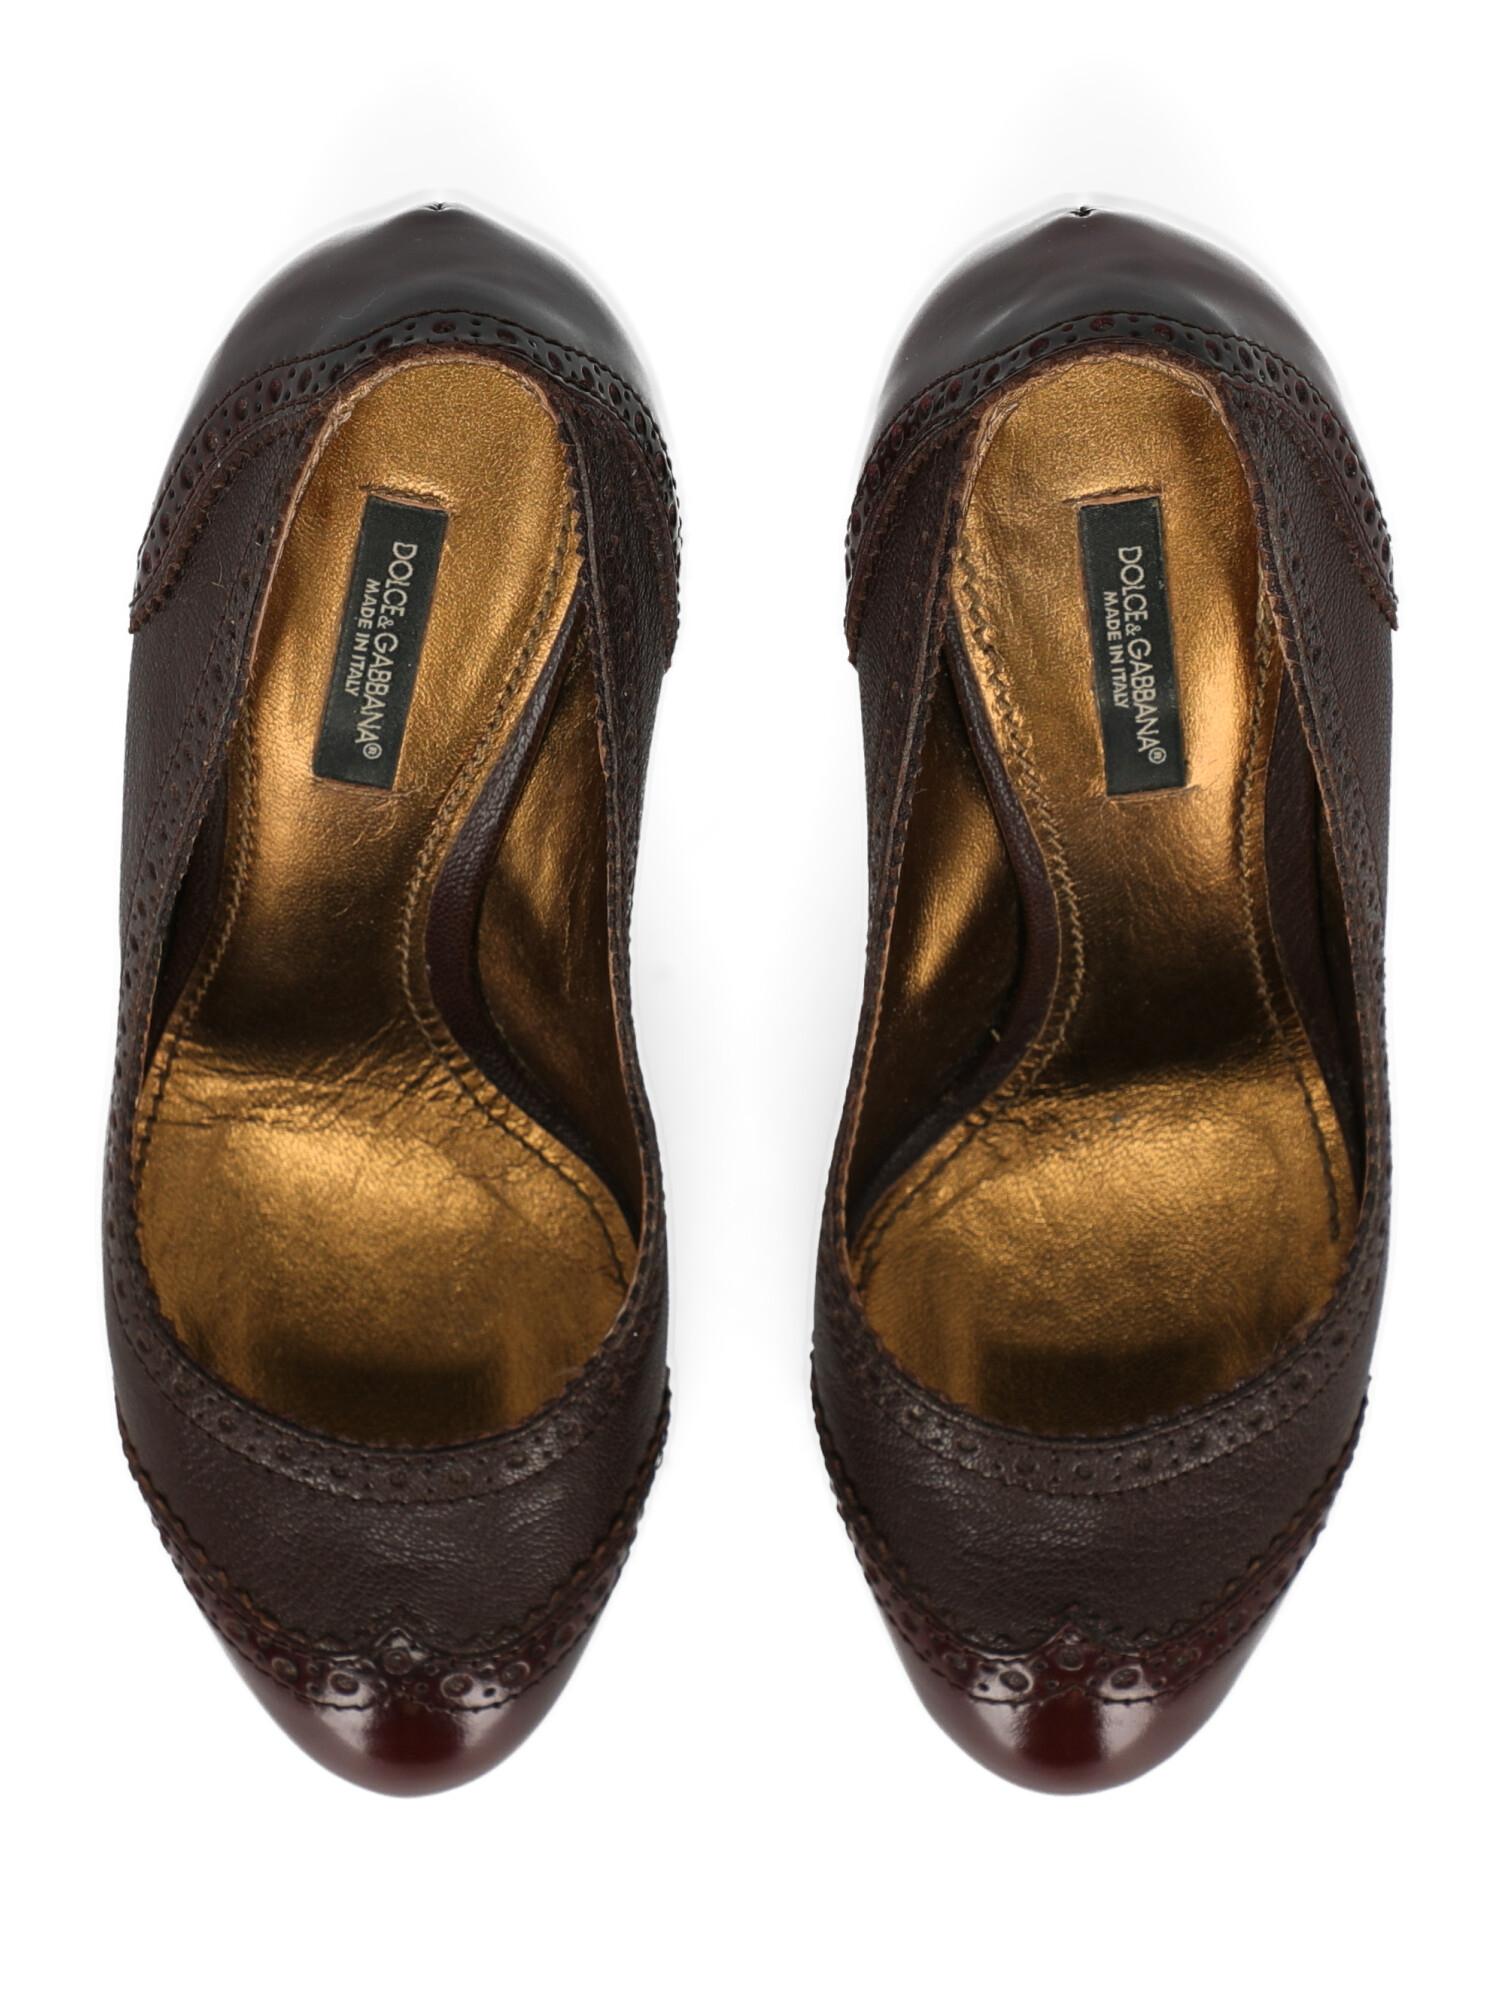 Dolce & Gabbana Woman Pumps Brown Leather IT 36.5 For Sale 1